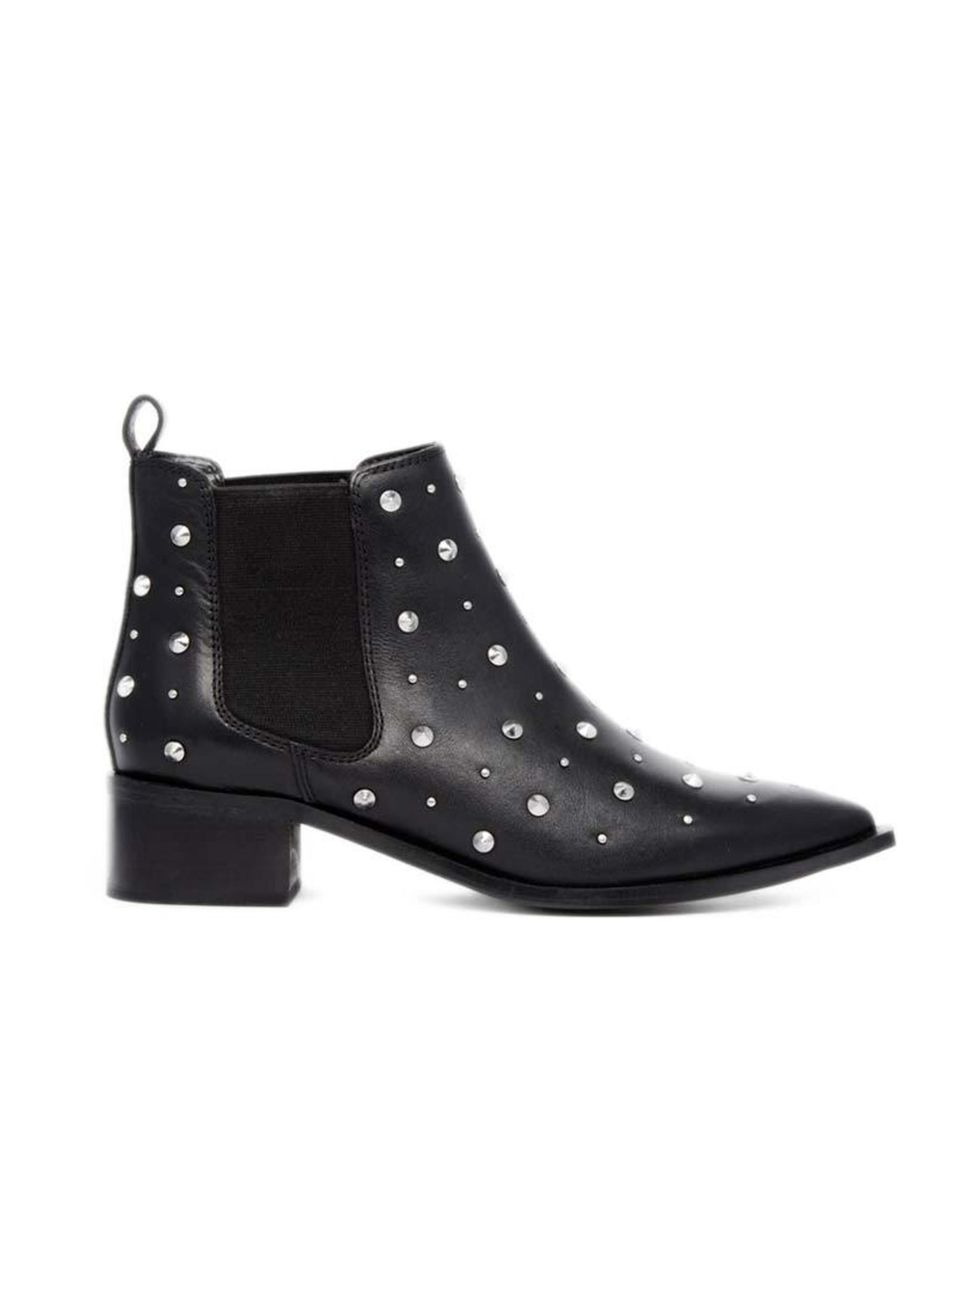 <p>Fashion Intern Emi Papanikola will pair these studded boots with denim.</p>

<p><a href="http://www.asos.com/ASOS/ASOS-RIGHT-OFF-Leather-Pointed-Ankle-Boots/Prod/pgeproduct.aspx?iid=5233569&cid=6992&sh=0&pge=3&pgesize=36&sort=-1&clr=Black&totalstyles=3